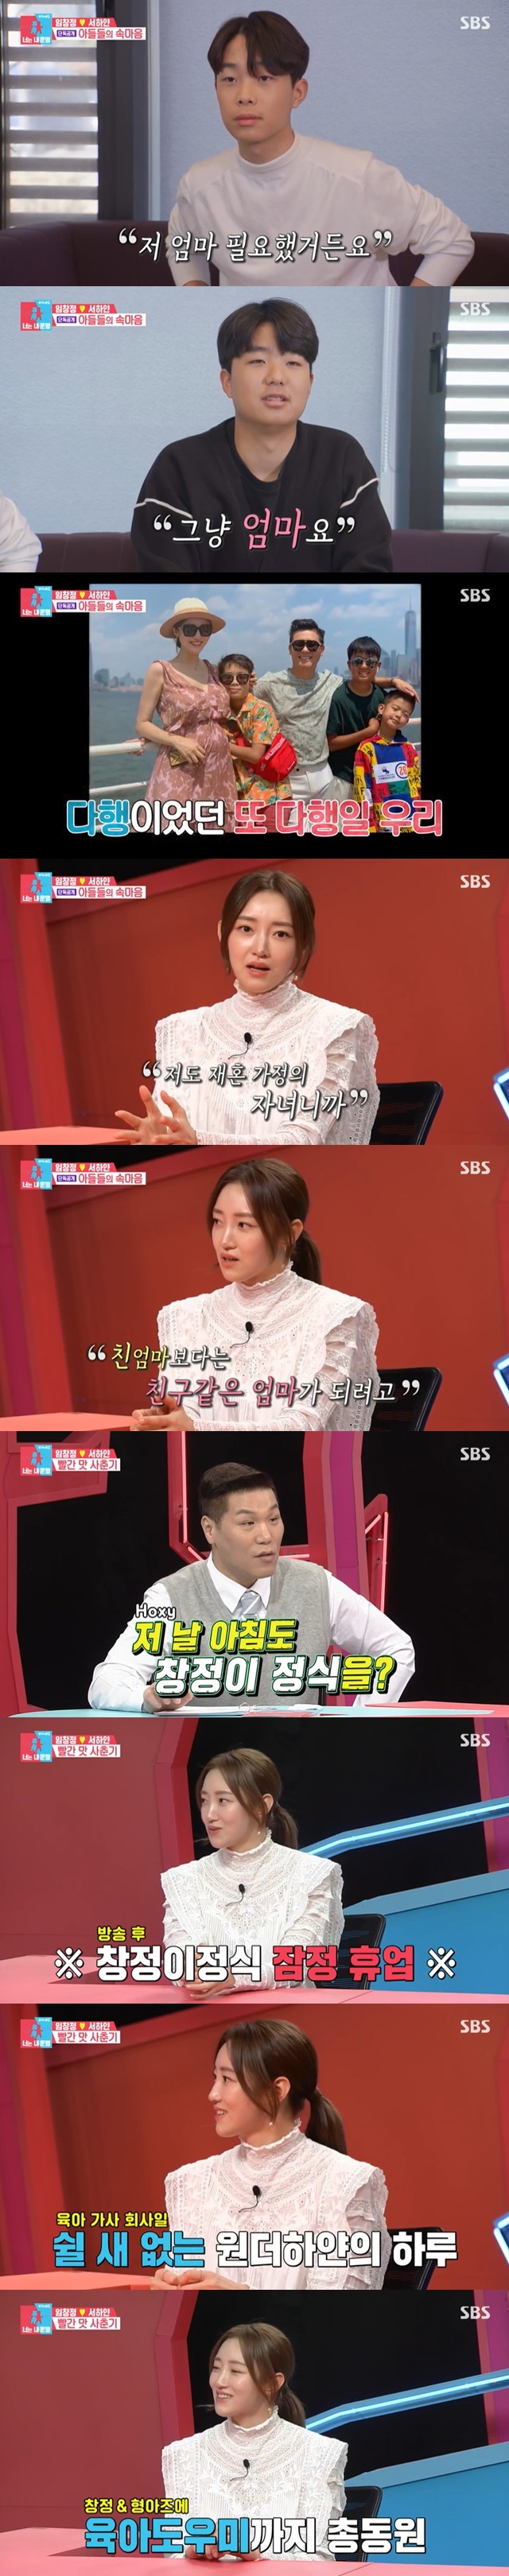 West White said he stopped making breakfast for Im Chang-jung 7-chong half-time in a hot reaction after the broadcast.On April 11, SBS Same Bed, Different Dreams 2 Season 2 - You Are My Destiny depicted the shopping of Im Chang-jung wife Seo Ha-yan and two sons.On this day, Seo Haiyan shopped with his two sons Lim Jun-woo and Lim Jun-sung.The two sons said, When my father Im Chang-jung is together, people are constantly asking for a photo shoot, adding, It is rather comfortable and good without Im Chang-jung.Then, when the West White picked up the clothes of the two sons, the two sons also picked the clothes of the West White and showed a cheerful appearance.In particular, the two sons added a warm heart to the fact that Seo Hee-yan said It is more beautiful than the model.The crew asked Lim Joon-woo and Lim Jun-sung about how they had met their stepmother Seo Ha-yan when they first met her.I was eight years old when I first met Seo Ha-yeon. My eldest son, Lim Joon-woo, met his stepmother when he was 10 years old.Lim Jun-woo said that the first impression of Seo Haiyan was tall.I was seven years old when my mother lived alone, because I needed her, and that was good. Lim said, I hated it.I promised my father that he would never marriage with anyone else, and he suddenly got upset about marriage, but it seems to be okay to marriage, he confessed.When the production team asked, What is your mother? Lim Jun-woo replied, Just Mom, Mom ... just Mom.She had to have a mother. She accepted her stepmother, Seo Haiyan, as a family member. The two sons told Seo Haiyan, I love you.West White met his two sons and said, I sympathize. Im a child of a remarried family. I know how they have a stepmother.I dared to understand, he said, I have never heard of Junwoo. I tried to be a friend-like mother rather than a greed that I would be a mother, Seo Hai-yan said. The children who watched the broadcast said, I was good at my mothers screen.